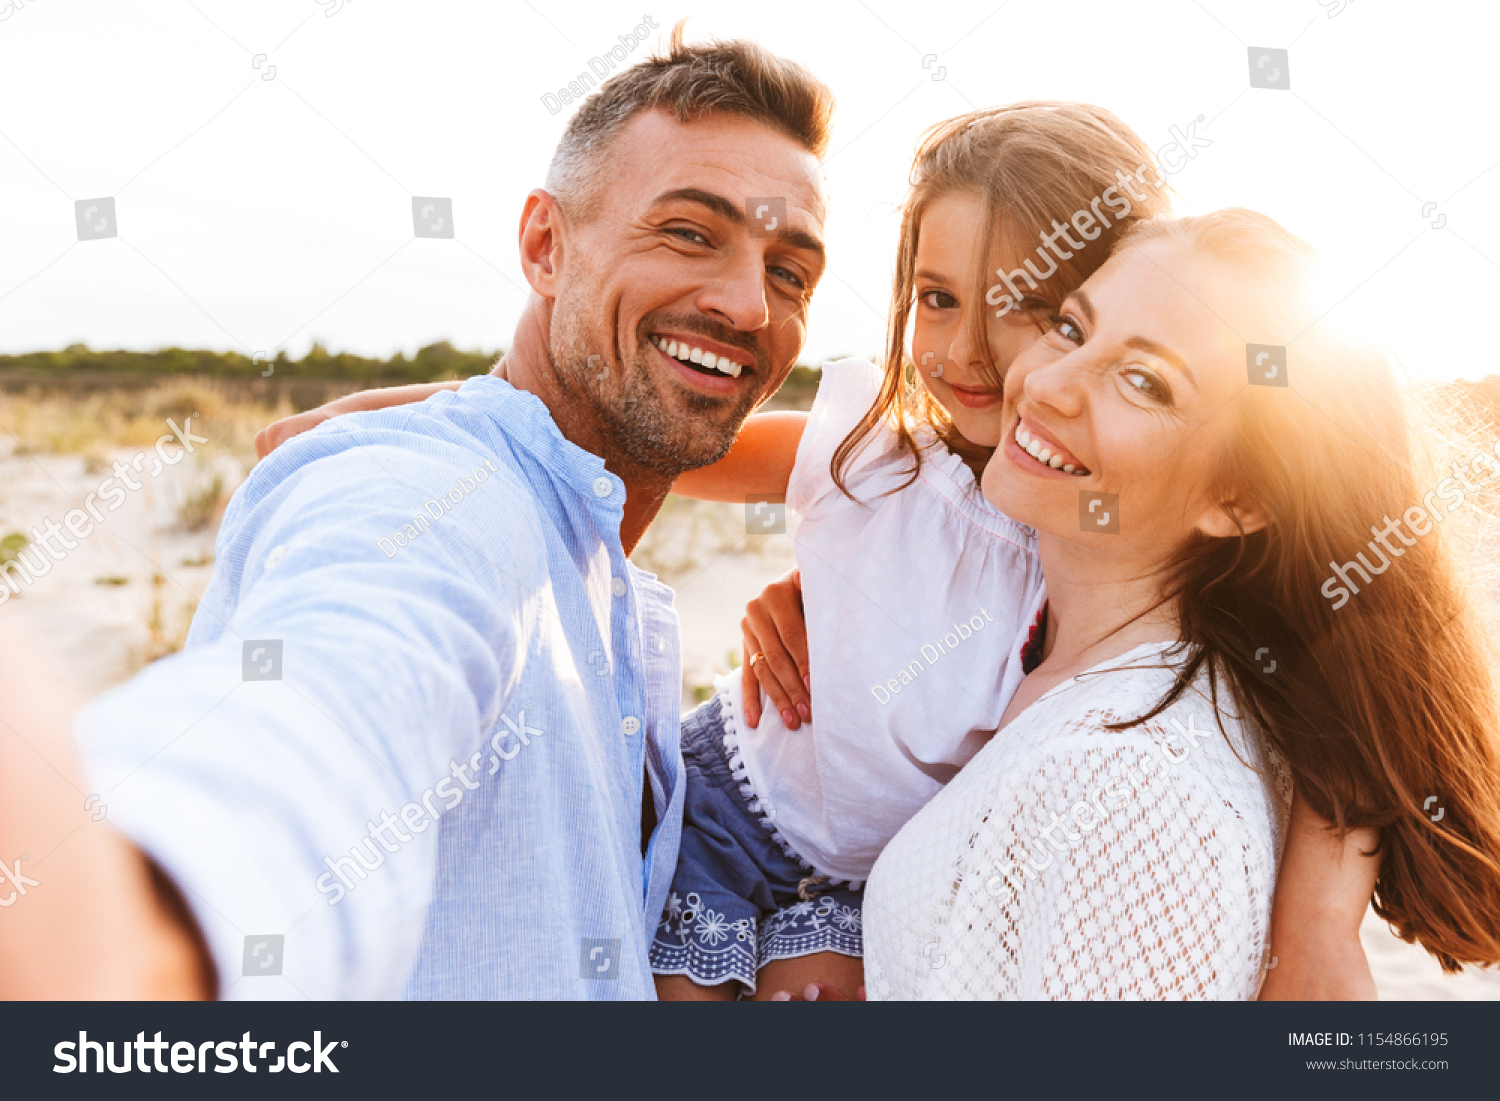 Happy family spending good time at the beach together, taking selfie #1154866195